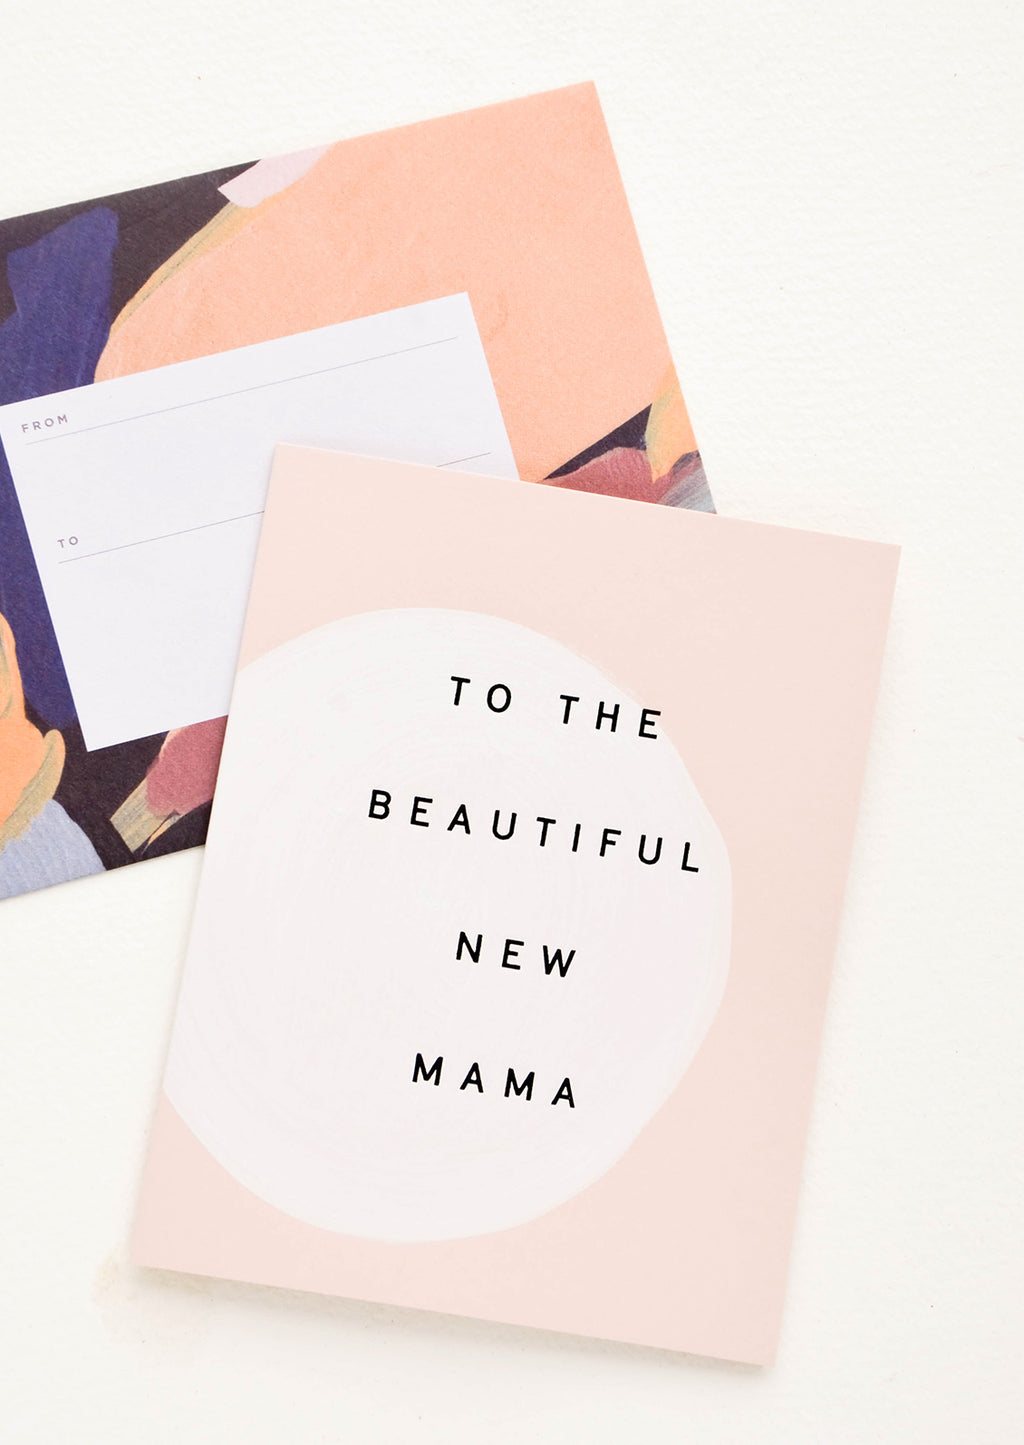 2: Greeting card with hand painted circle and black text reading "To The Beautiful New Mama", paired with abstract printed envelope